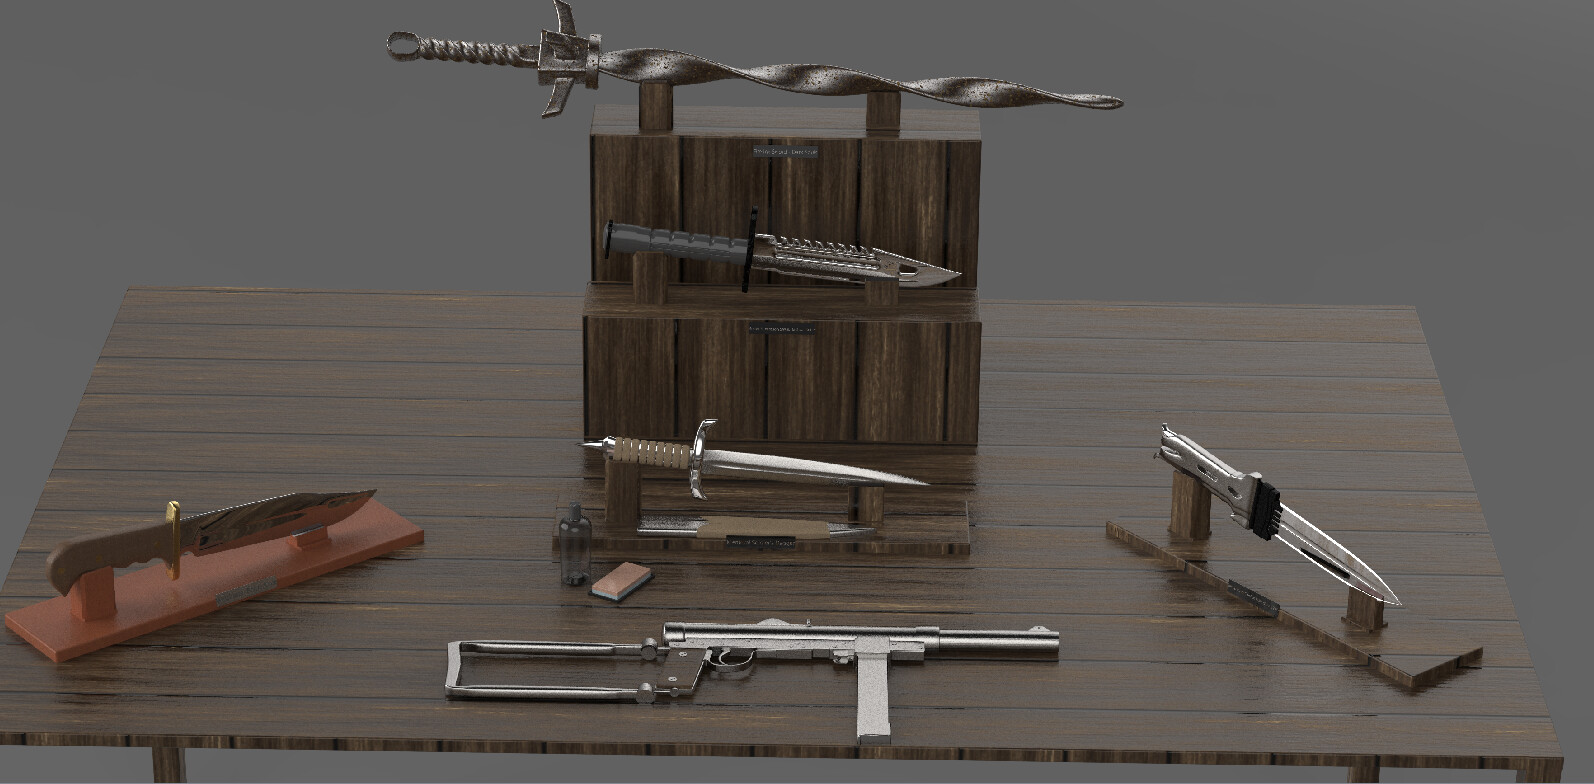 Partial Render of a full suite of armaments.